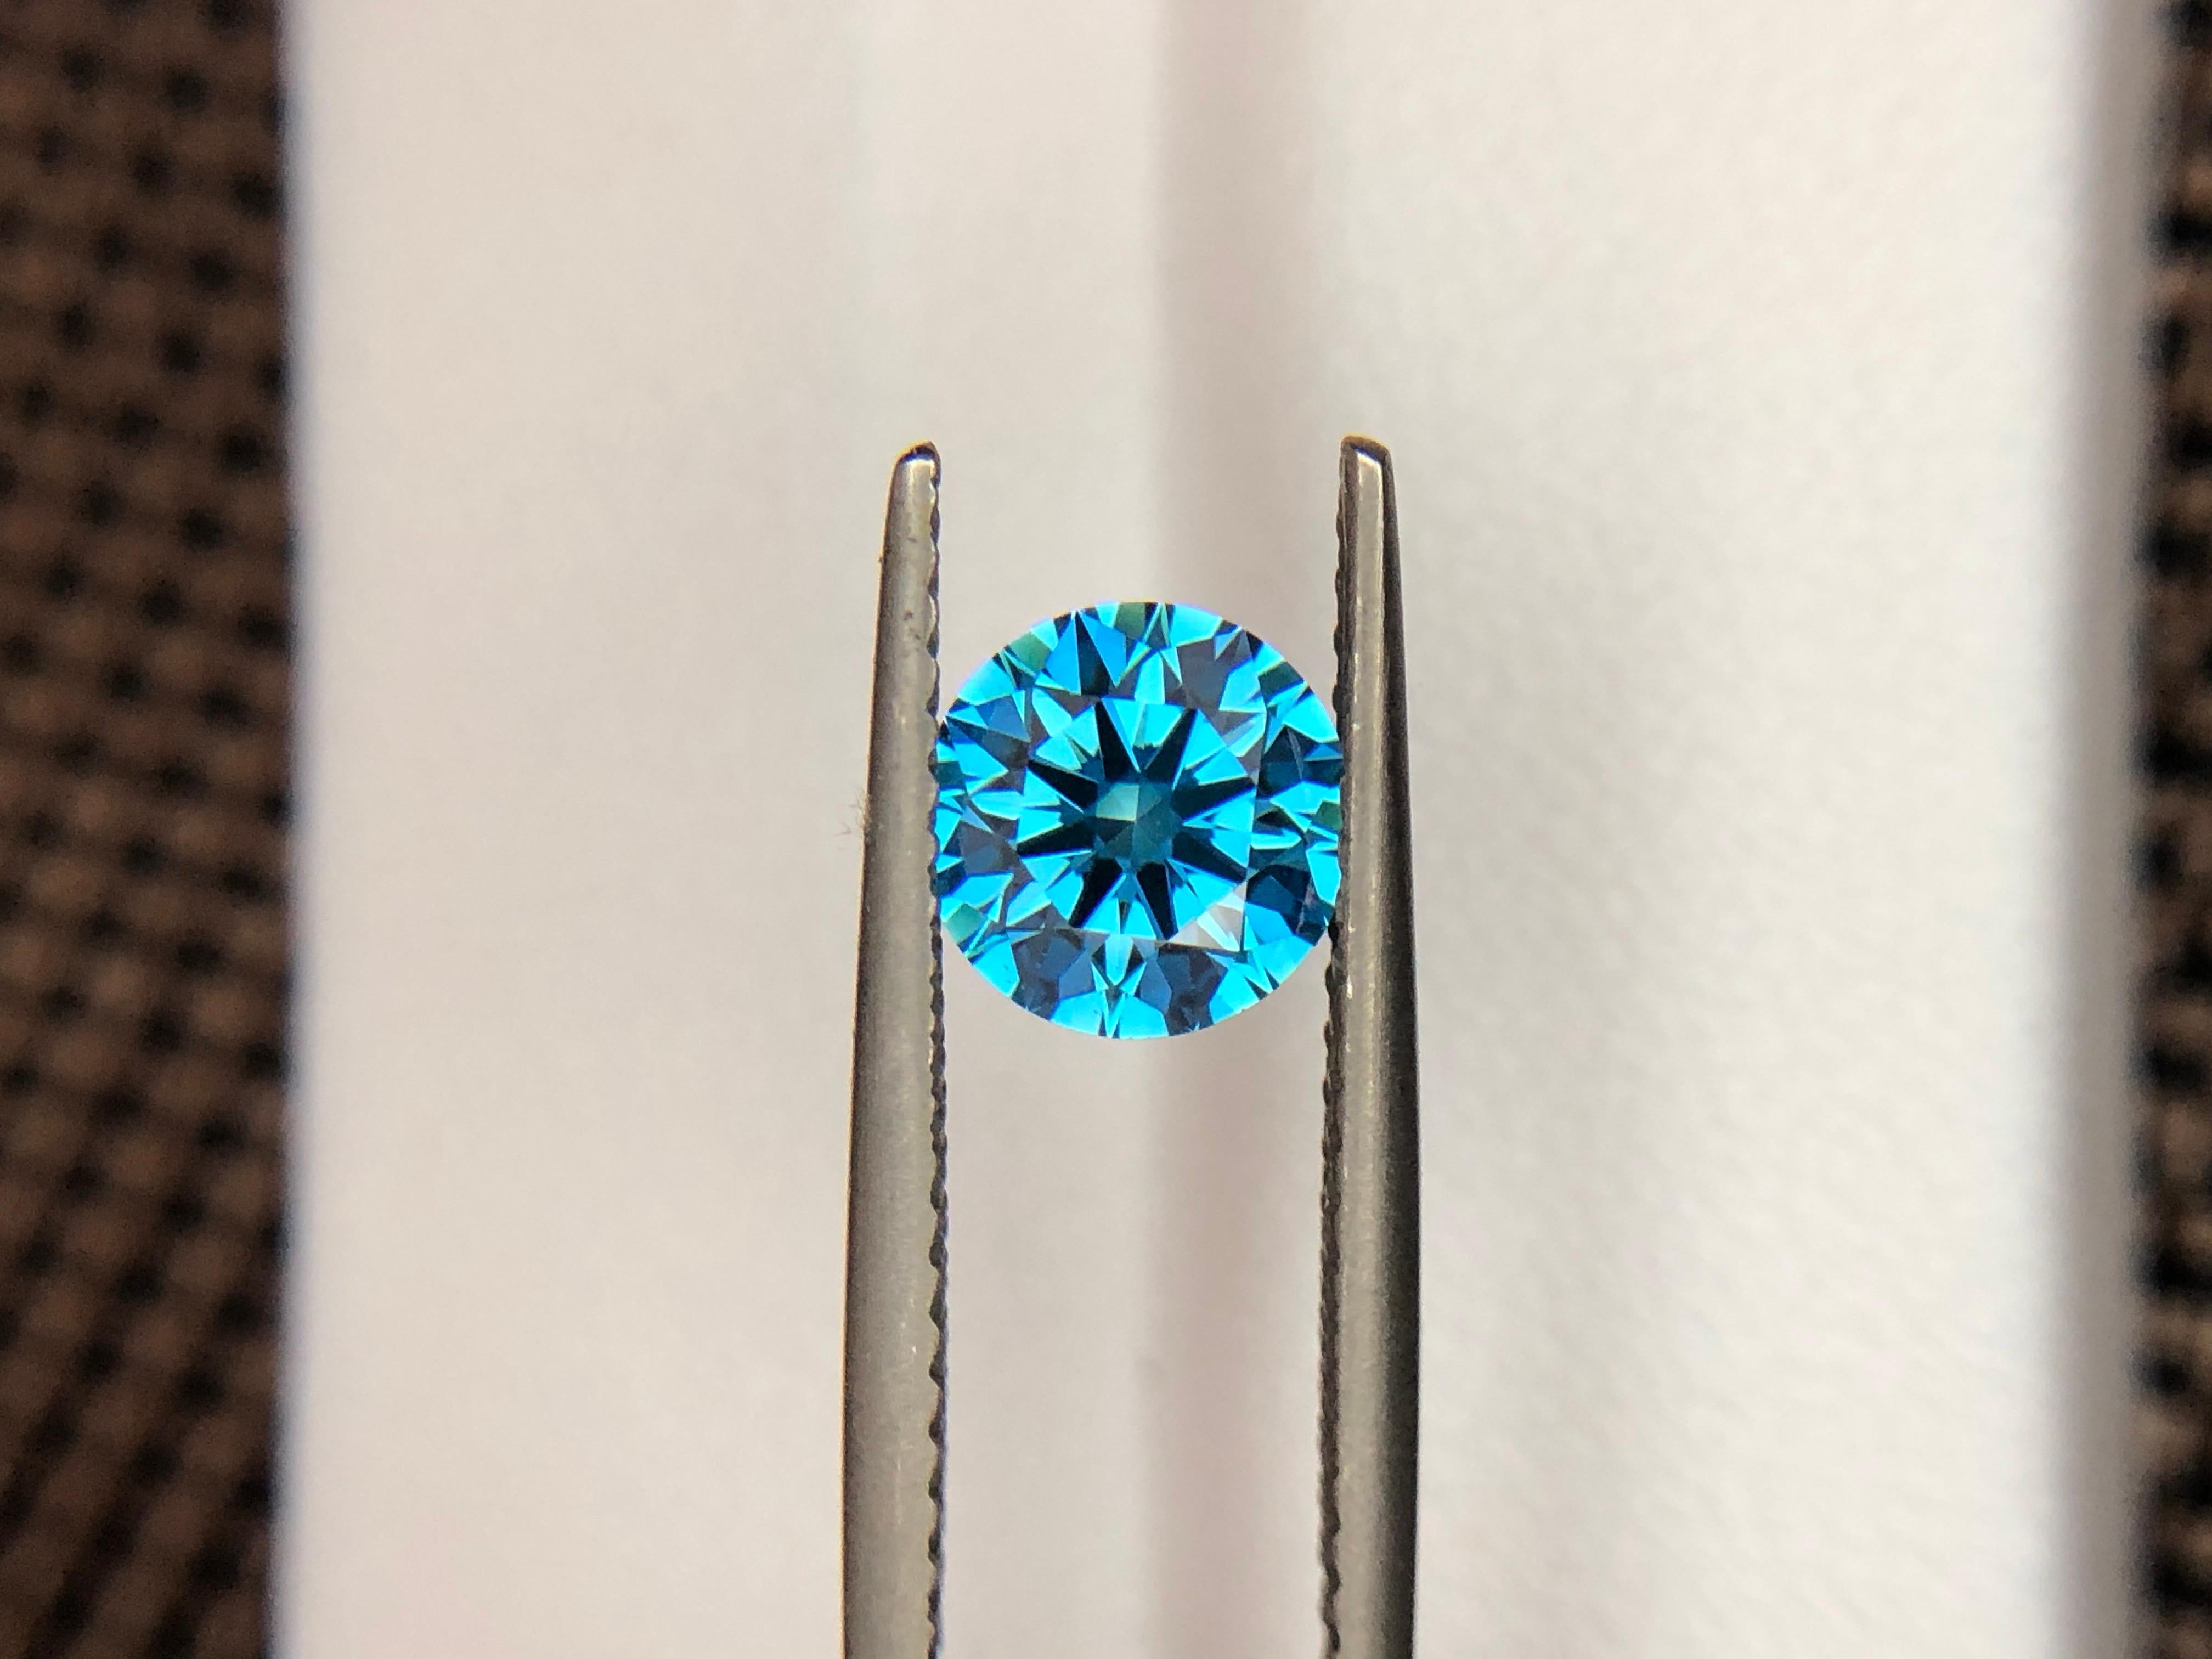 Introducing our exquisite Blue Diamond HPHT Round, 1.03 ct. Immerse yourself in the captivating allure of this rare gem, meticulously crafted to perfection. Elevate your collection with its timeless beauty. Limited availability, so seize this